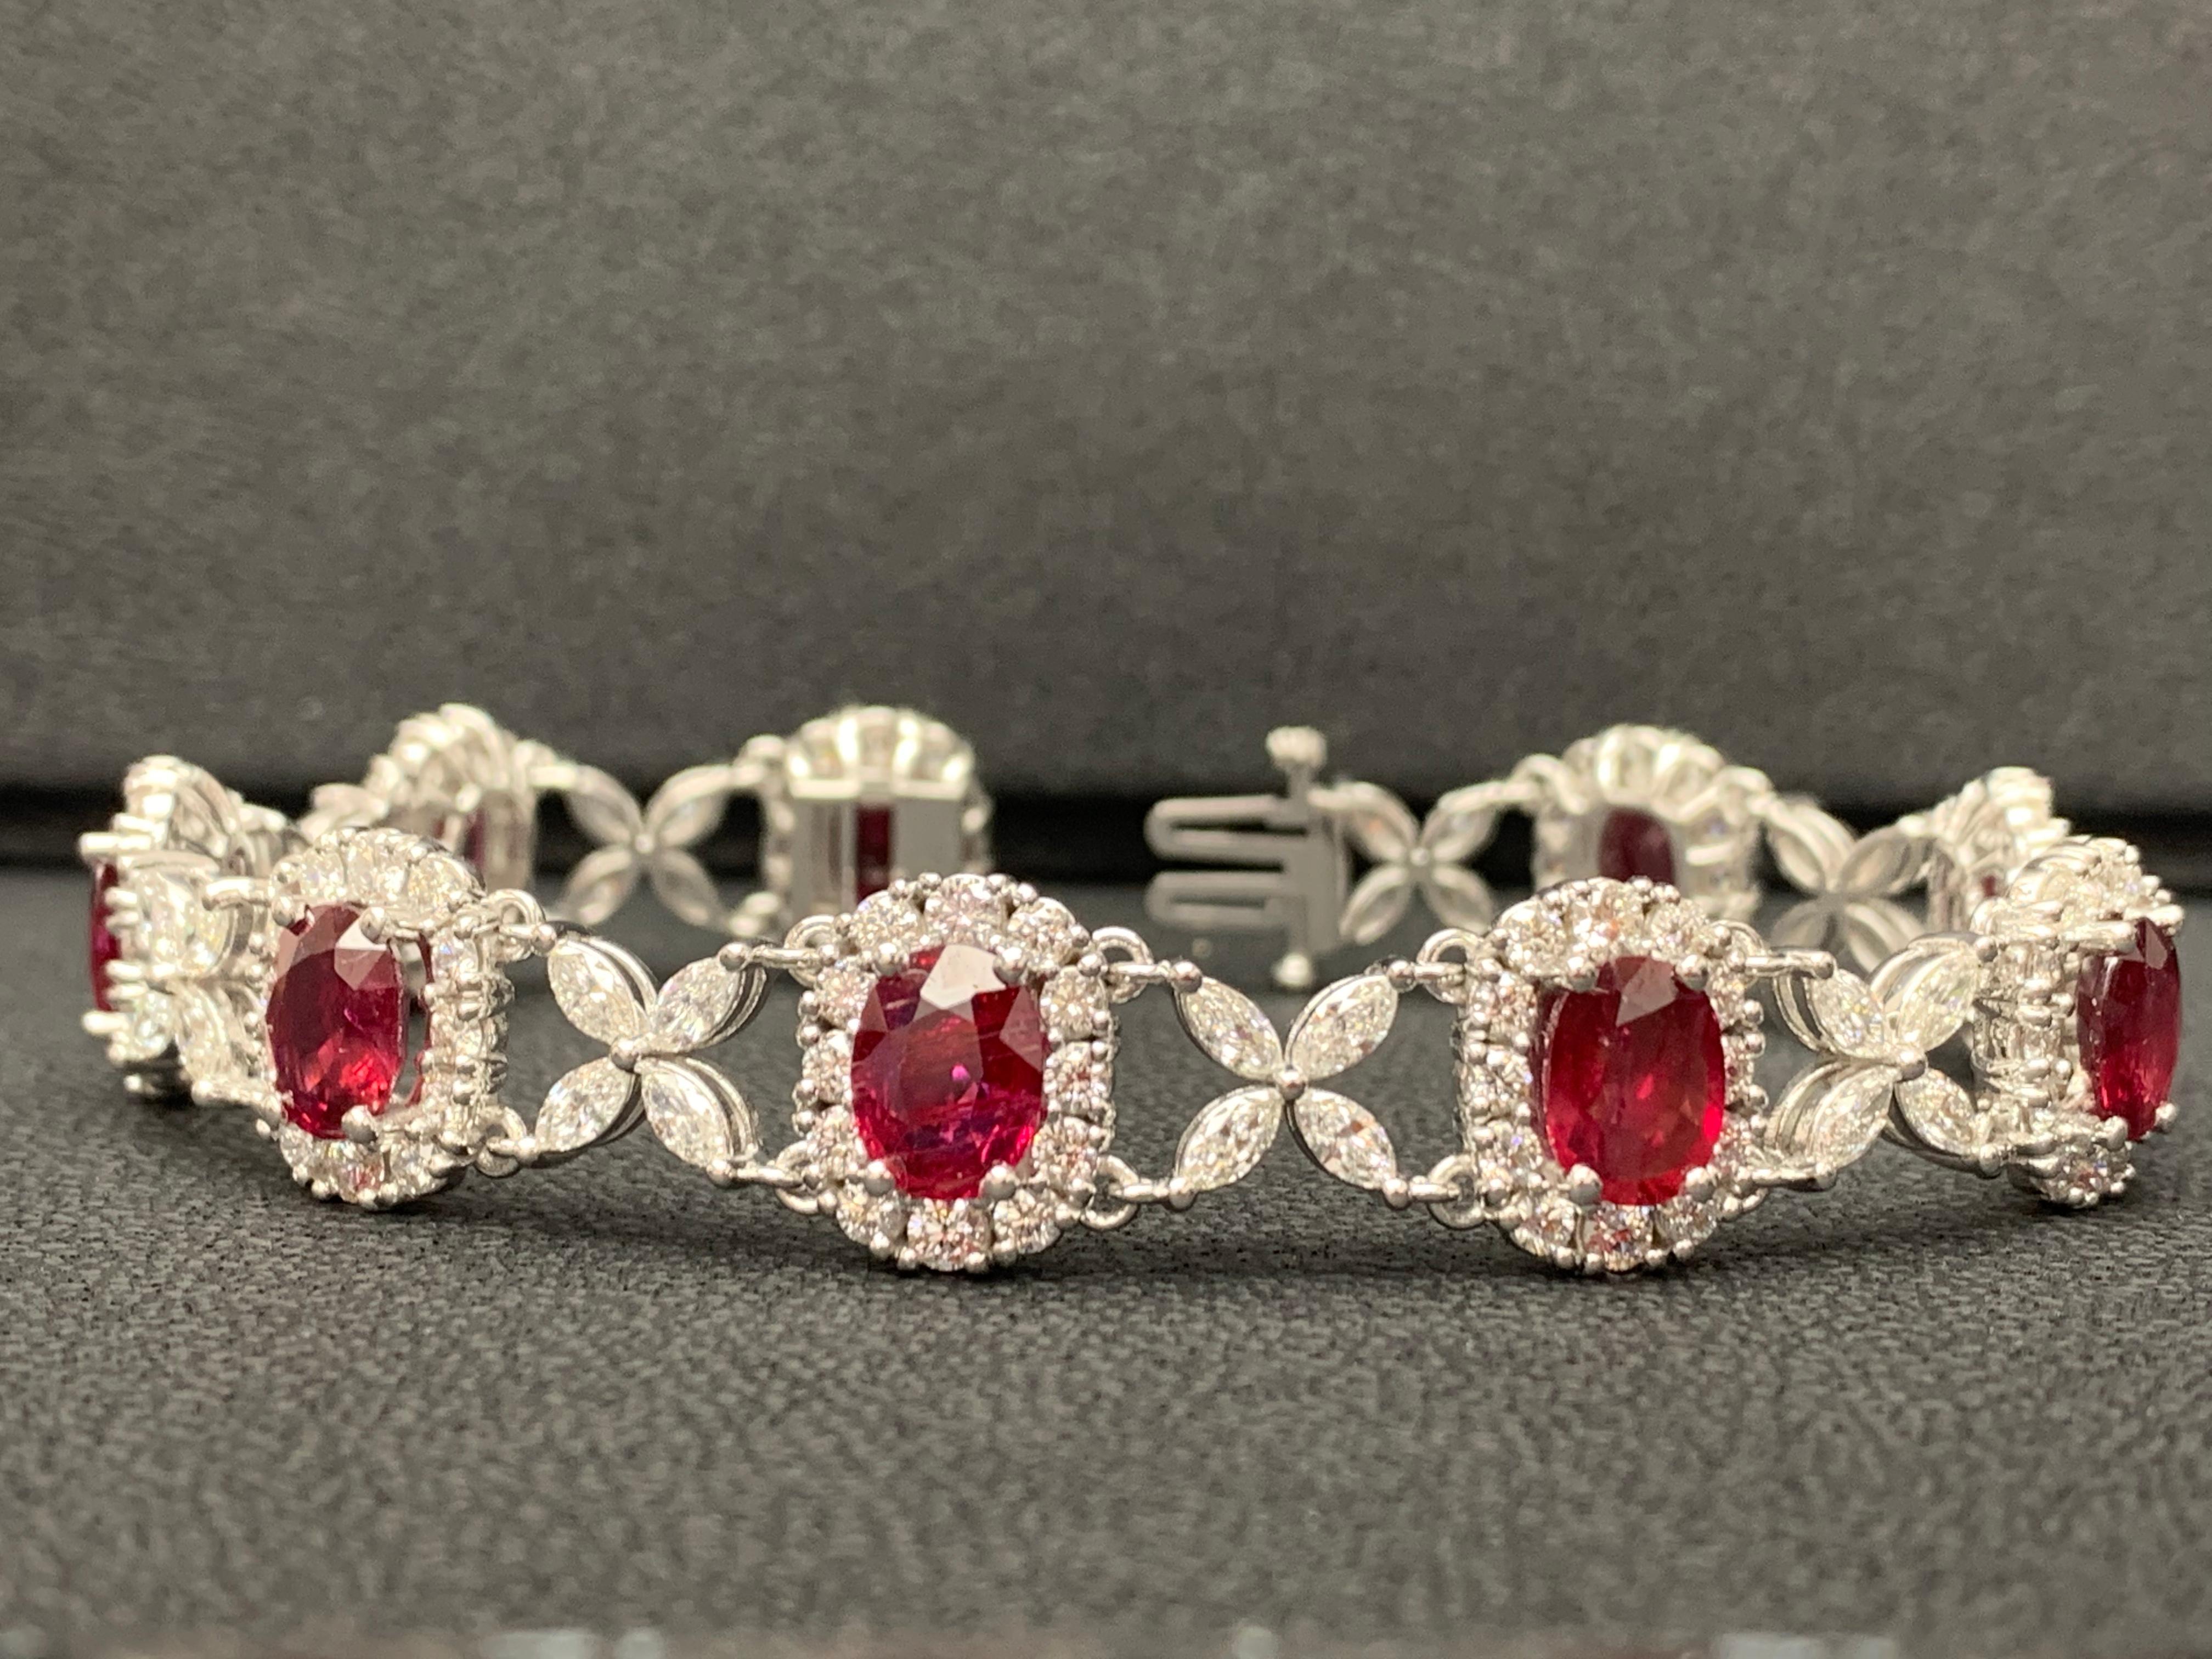 Modern 12.54 Carat Oval Cut Ruby and Diamond Tennis Bracelet in 14K White Gold For Sale